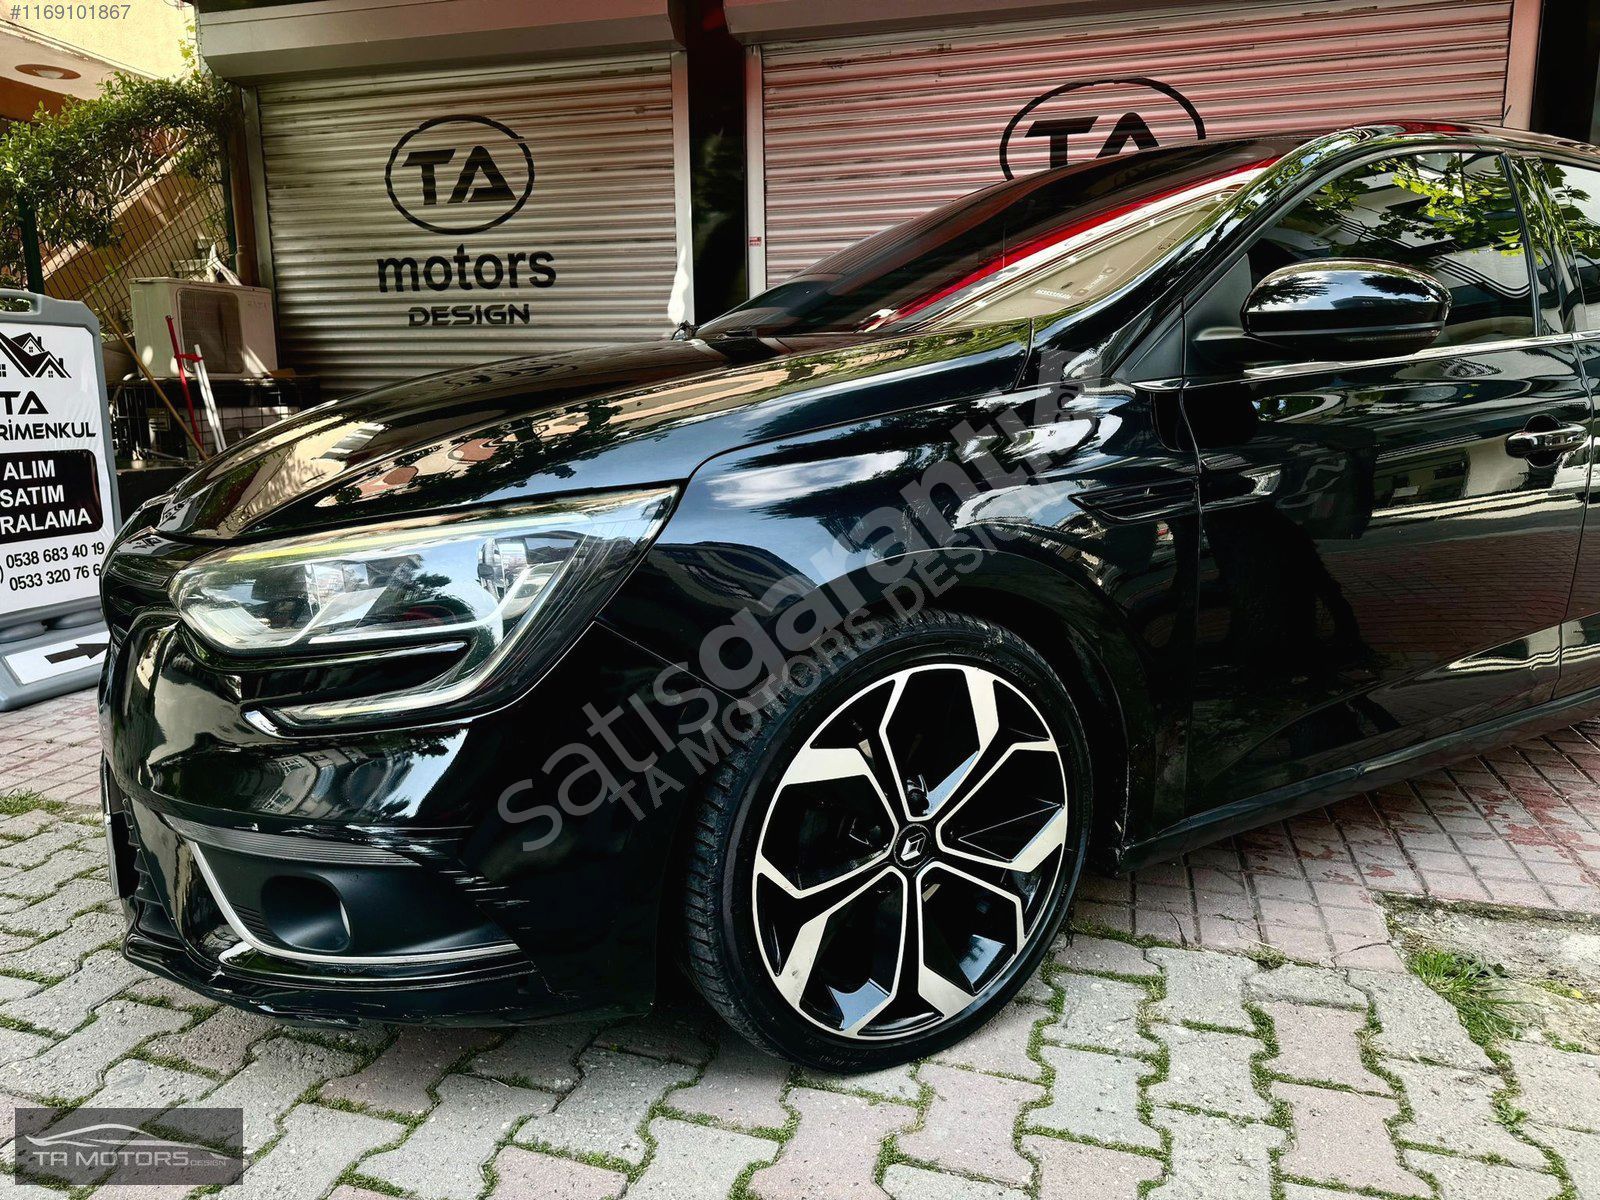 2017 MODEL RENAULT MEGANE TOUCH 1.5DCI 110 HP EDC